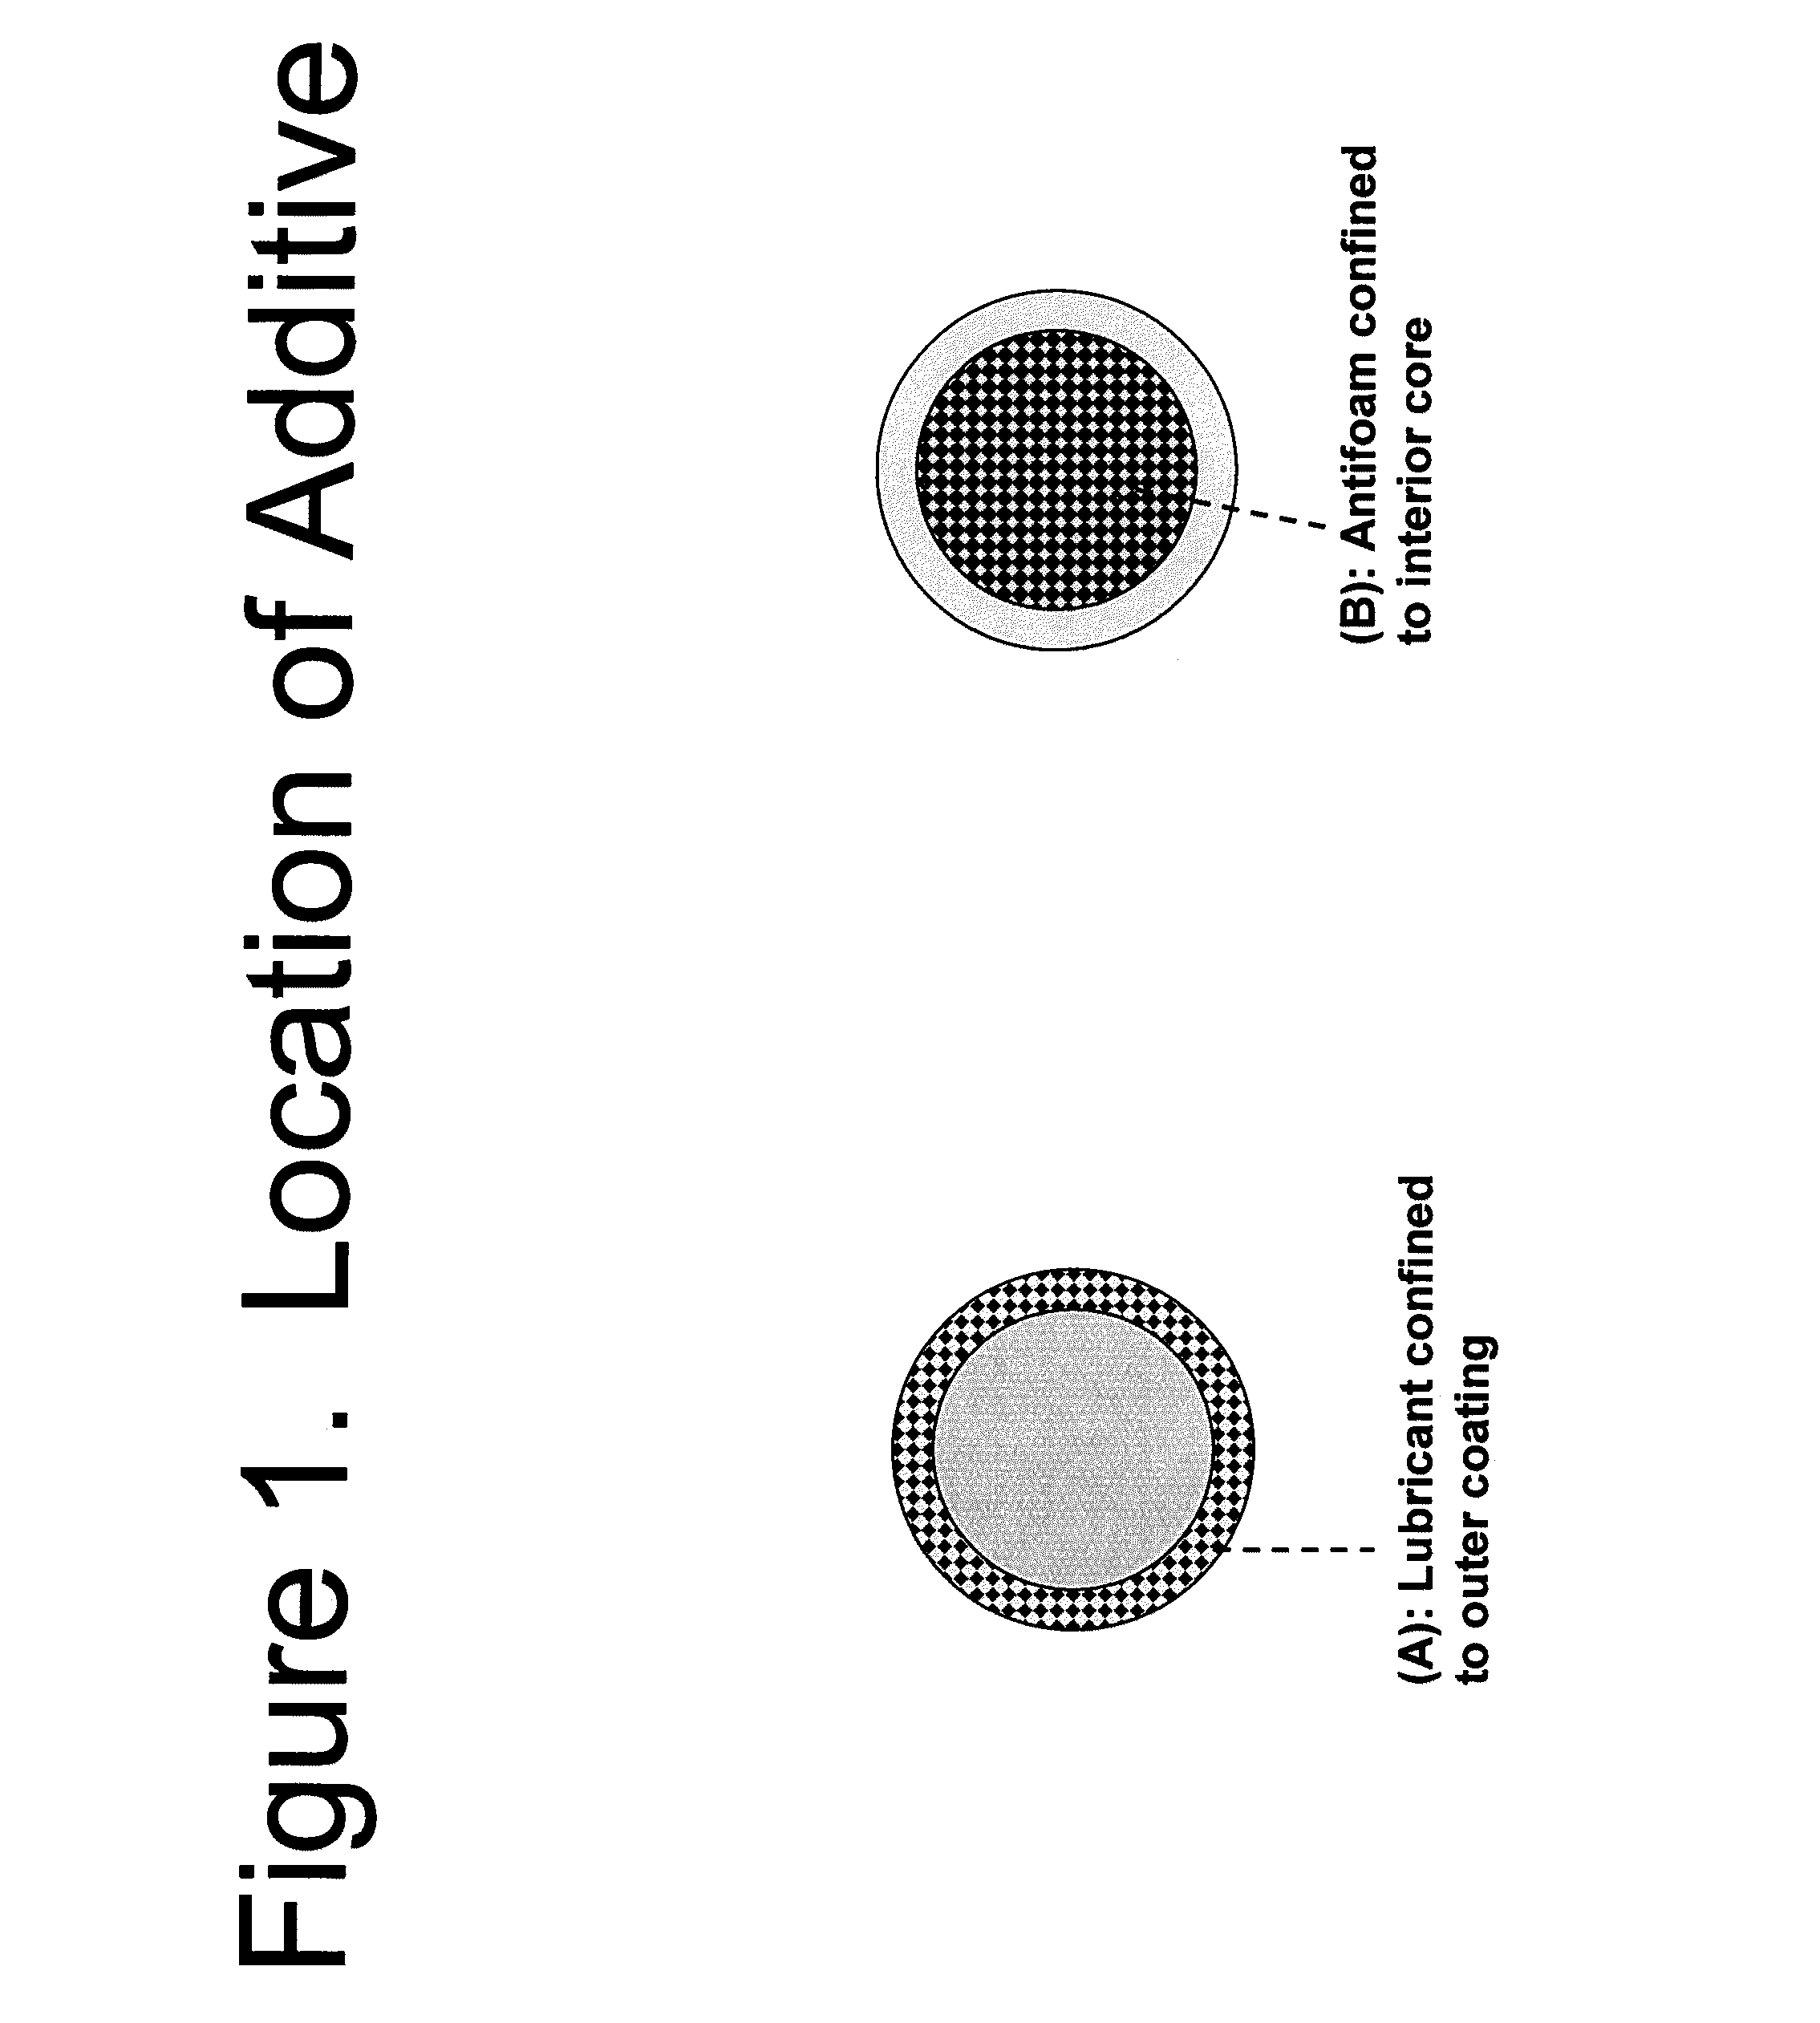 Method for producing granules with reduced dust potential comprising an antifoam agent